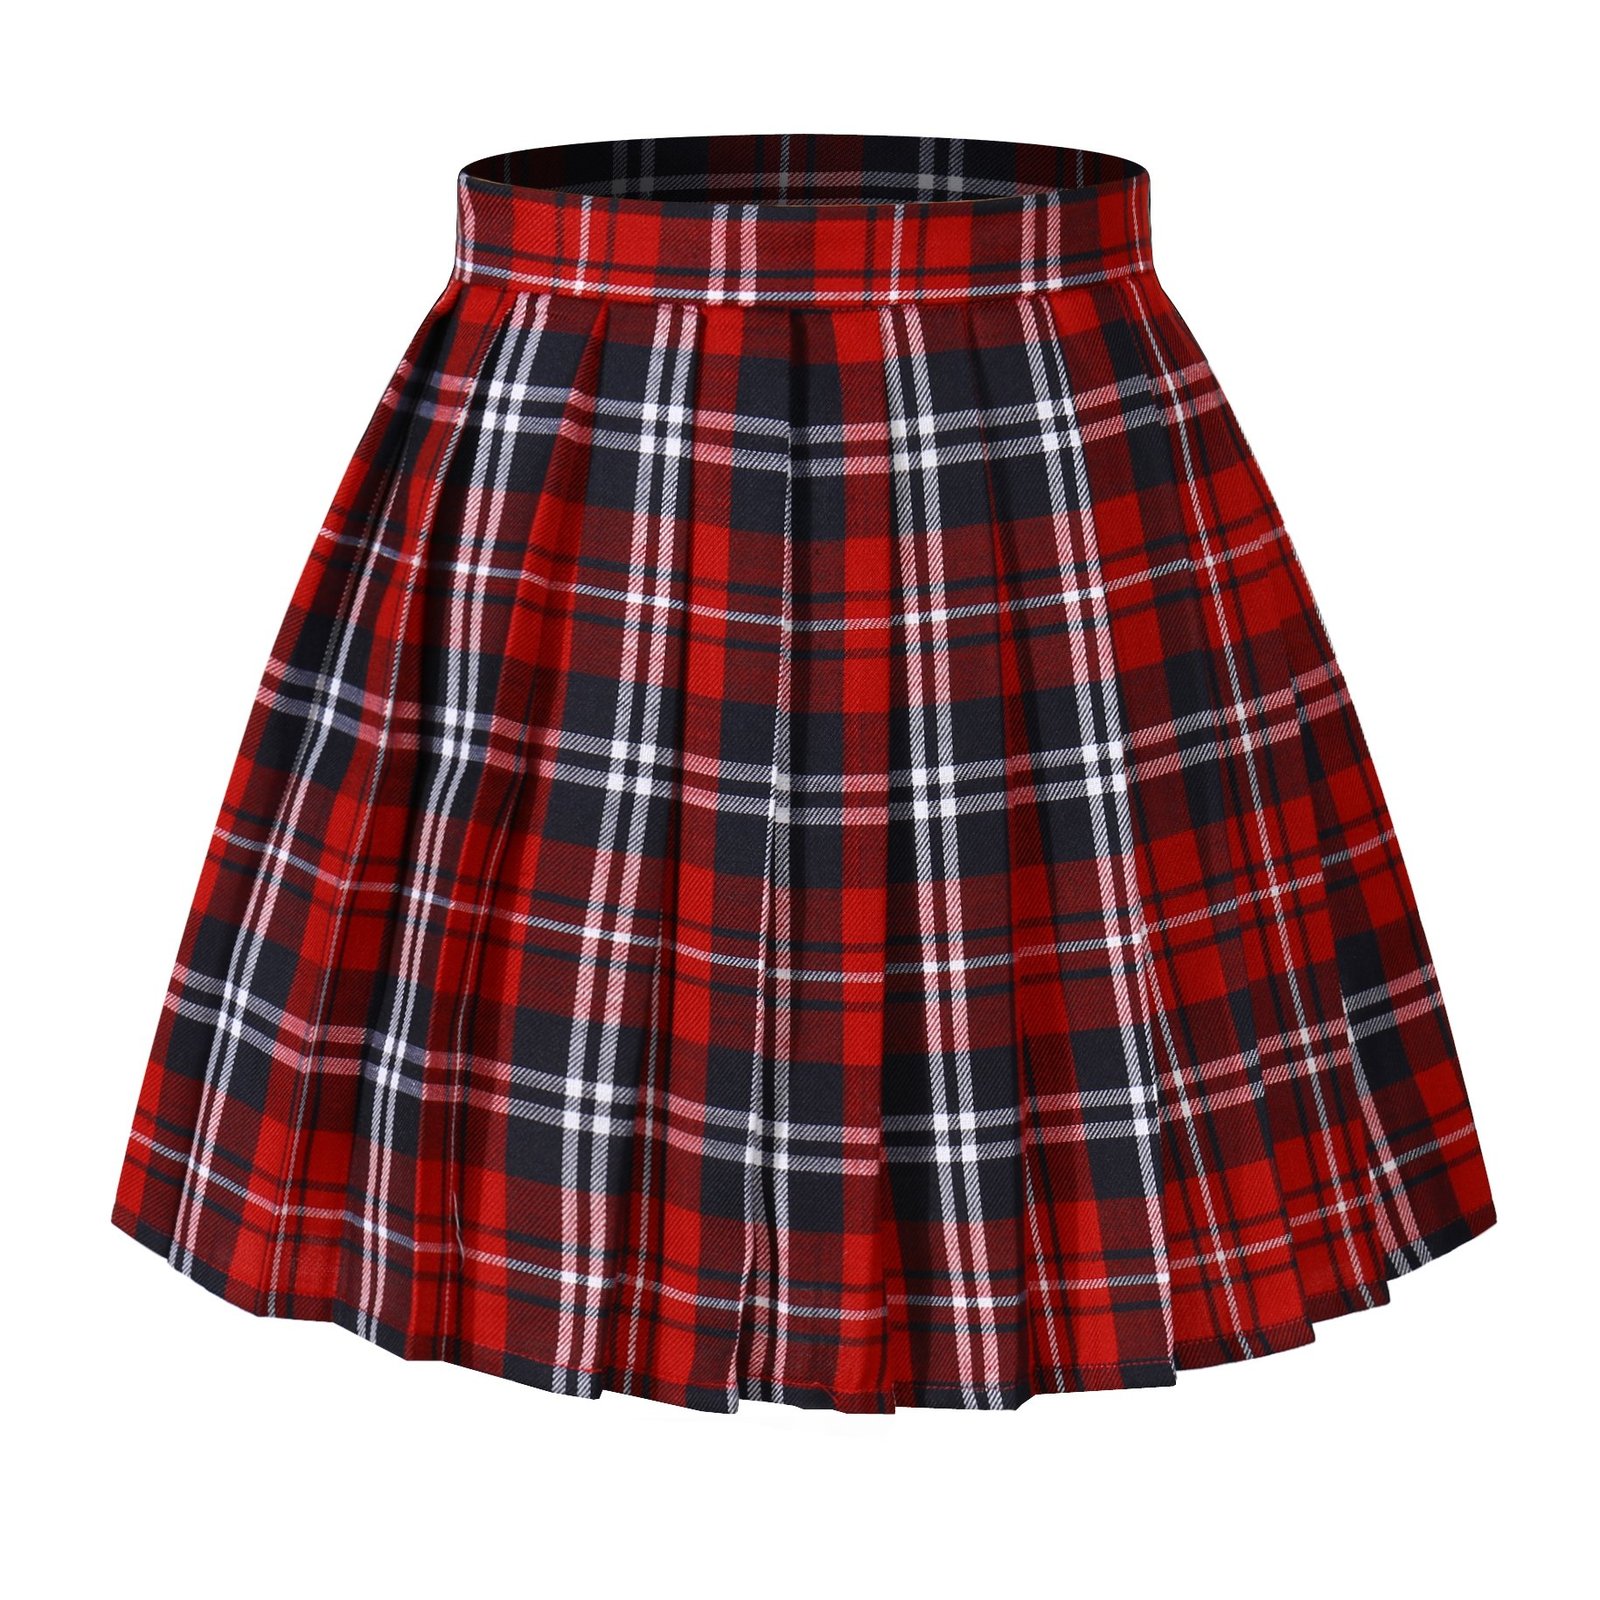 Girl's Japan A-line Kilt Plaid Pleated Costumes Skirts (M,Red blue )